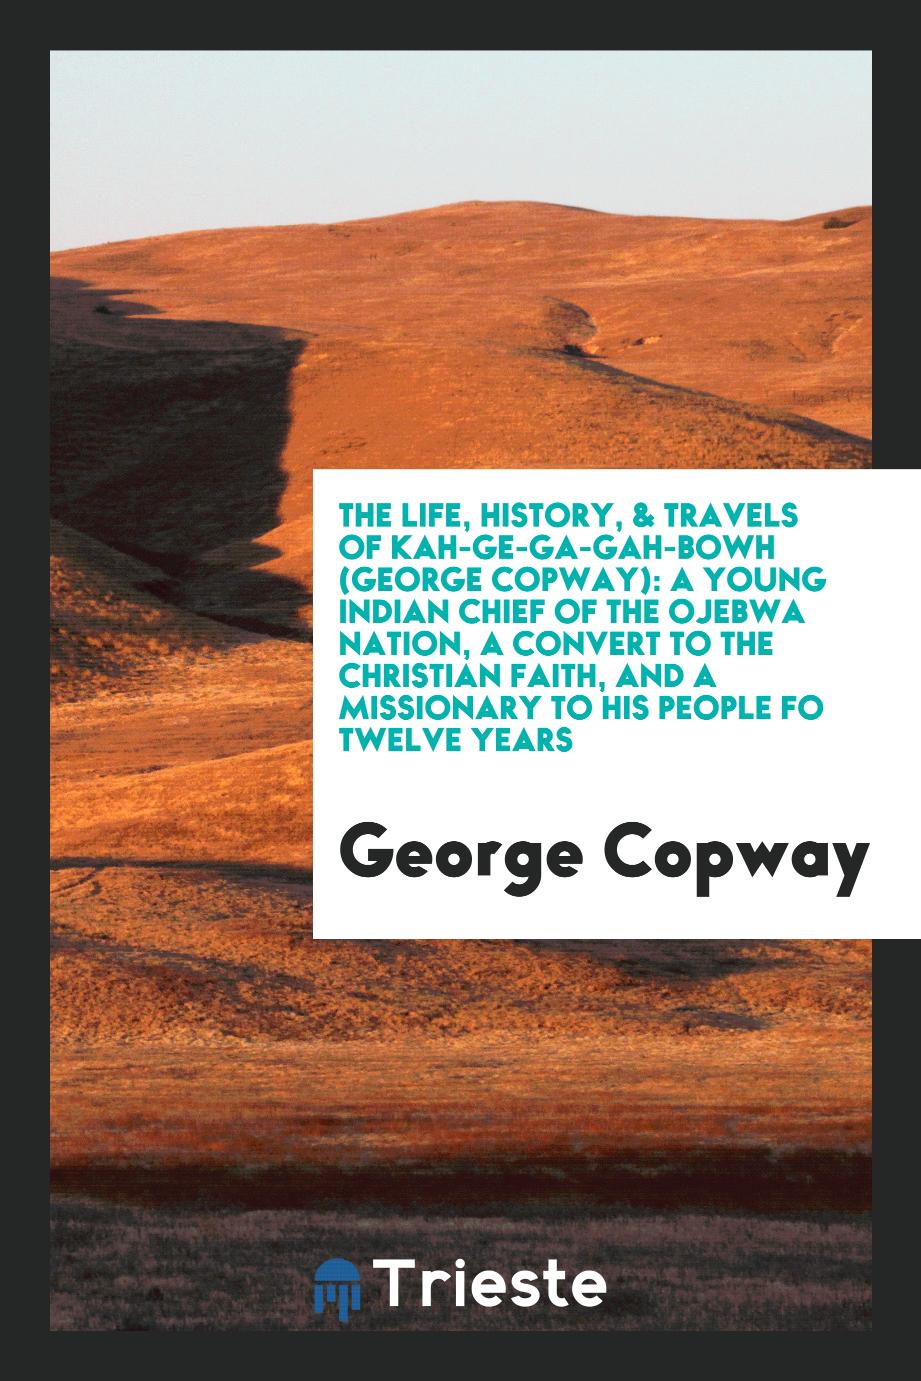 The Life, History, & Travels of Kah-Ge-Ga-Gah-Bowh (George Copway): A Young Indian Chief of the Ojebwa Nation, a Convert to the Christian Faith, and a Missionary to His People Fo Twelve Years